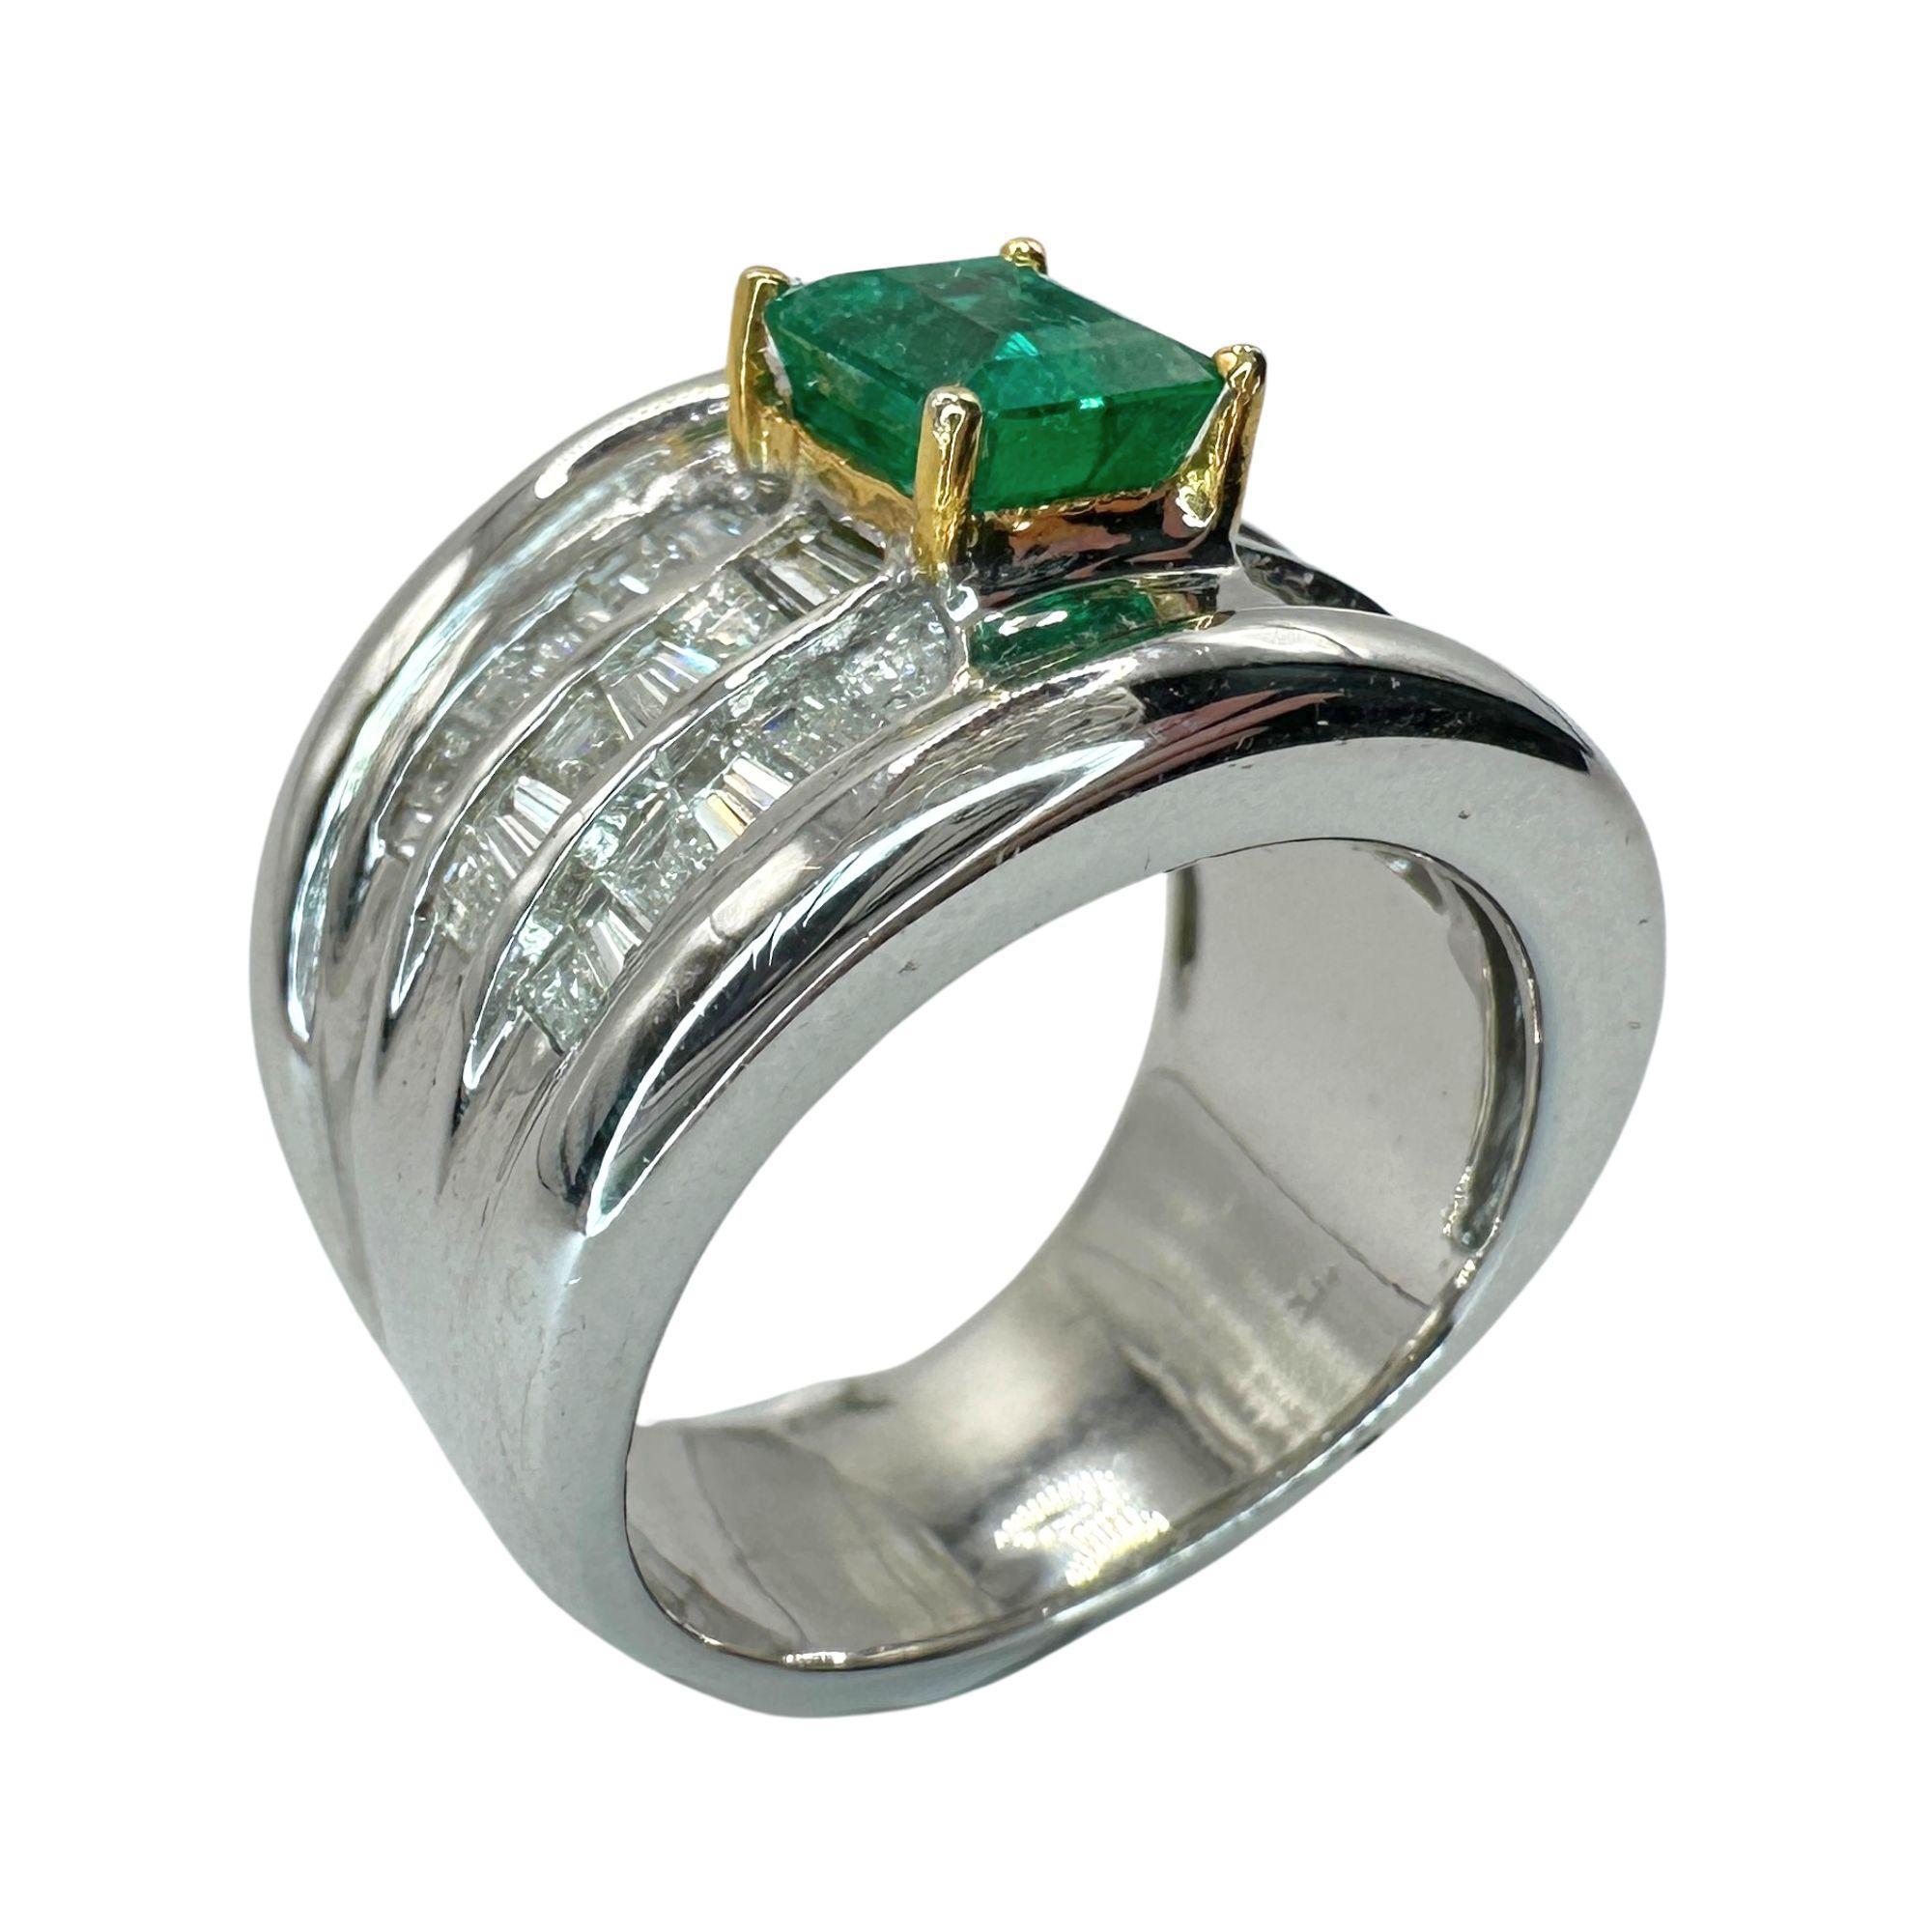 Indulge in luxury with our Heavy 18k Diamond and Emerald Wide Band Ring. Crafted from 18k white gold, this exquisite piece boasts stunning 1.26 carats of diamonds and 0.93 carat emerald center, making it a true statement of opulence. The intricate